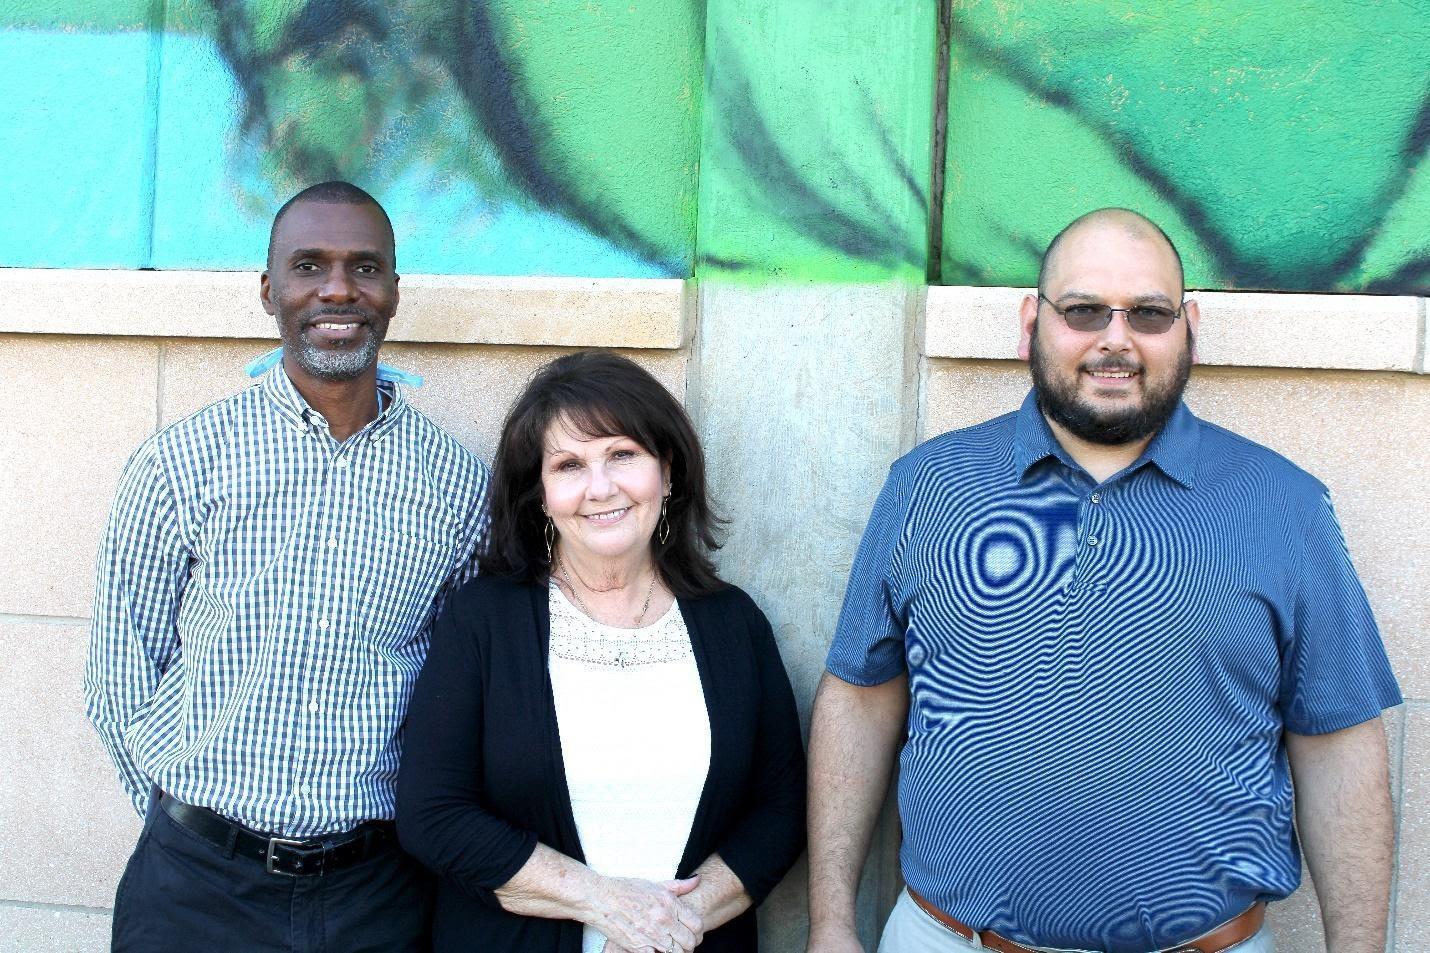 Photo by Ashley BarnerFrom left to right, Veterans Case Manager Charles Ray Harris, Jr., Program Director- Client Services Tammy Stevens, and Veterans Outreach Case Manager Jason McCarty are dedicated to helping low income veterans in need by offering a year-long program to help them get back on their feet.